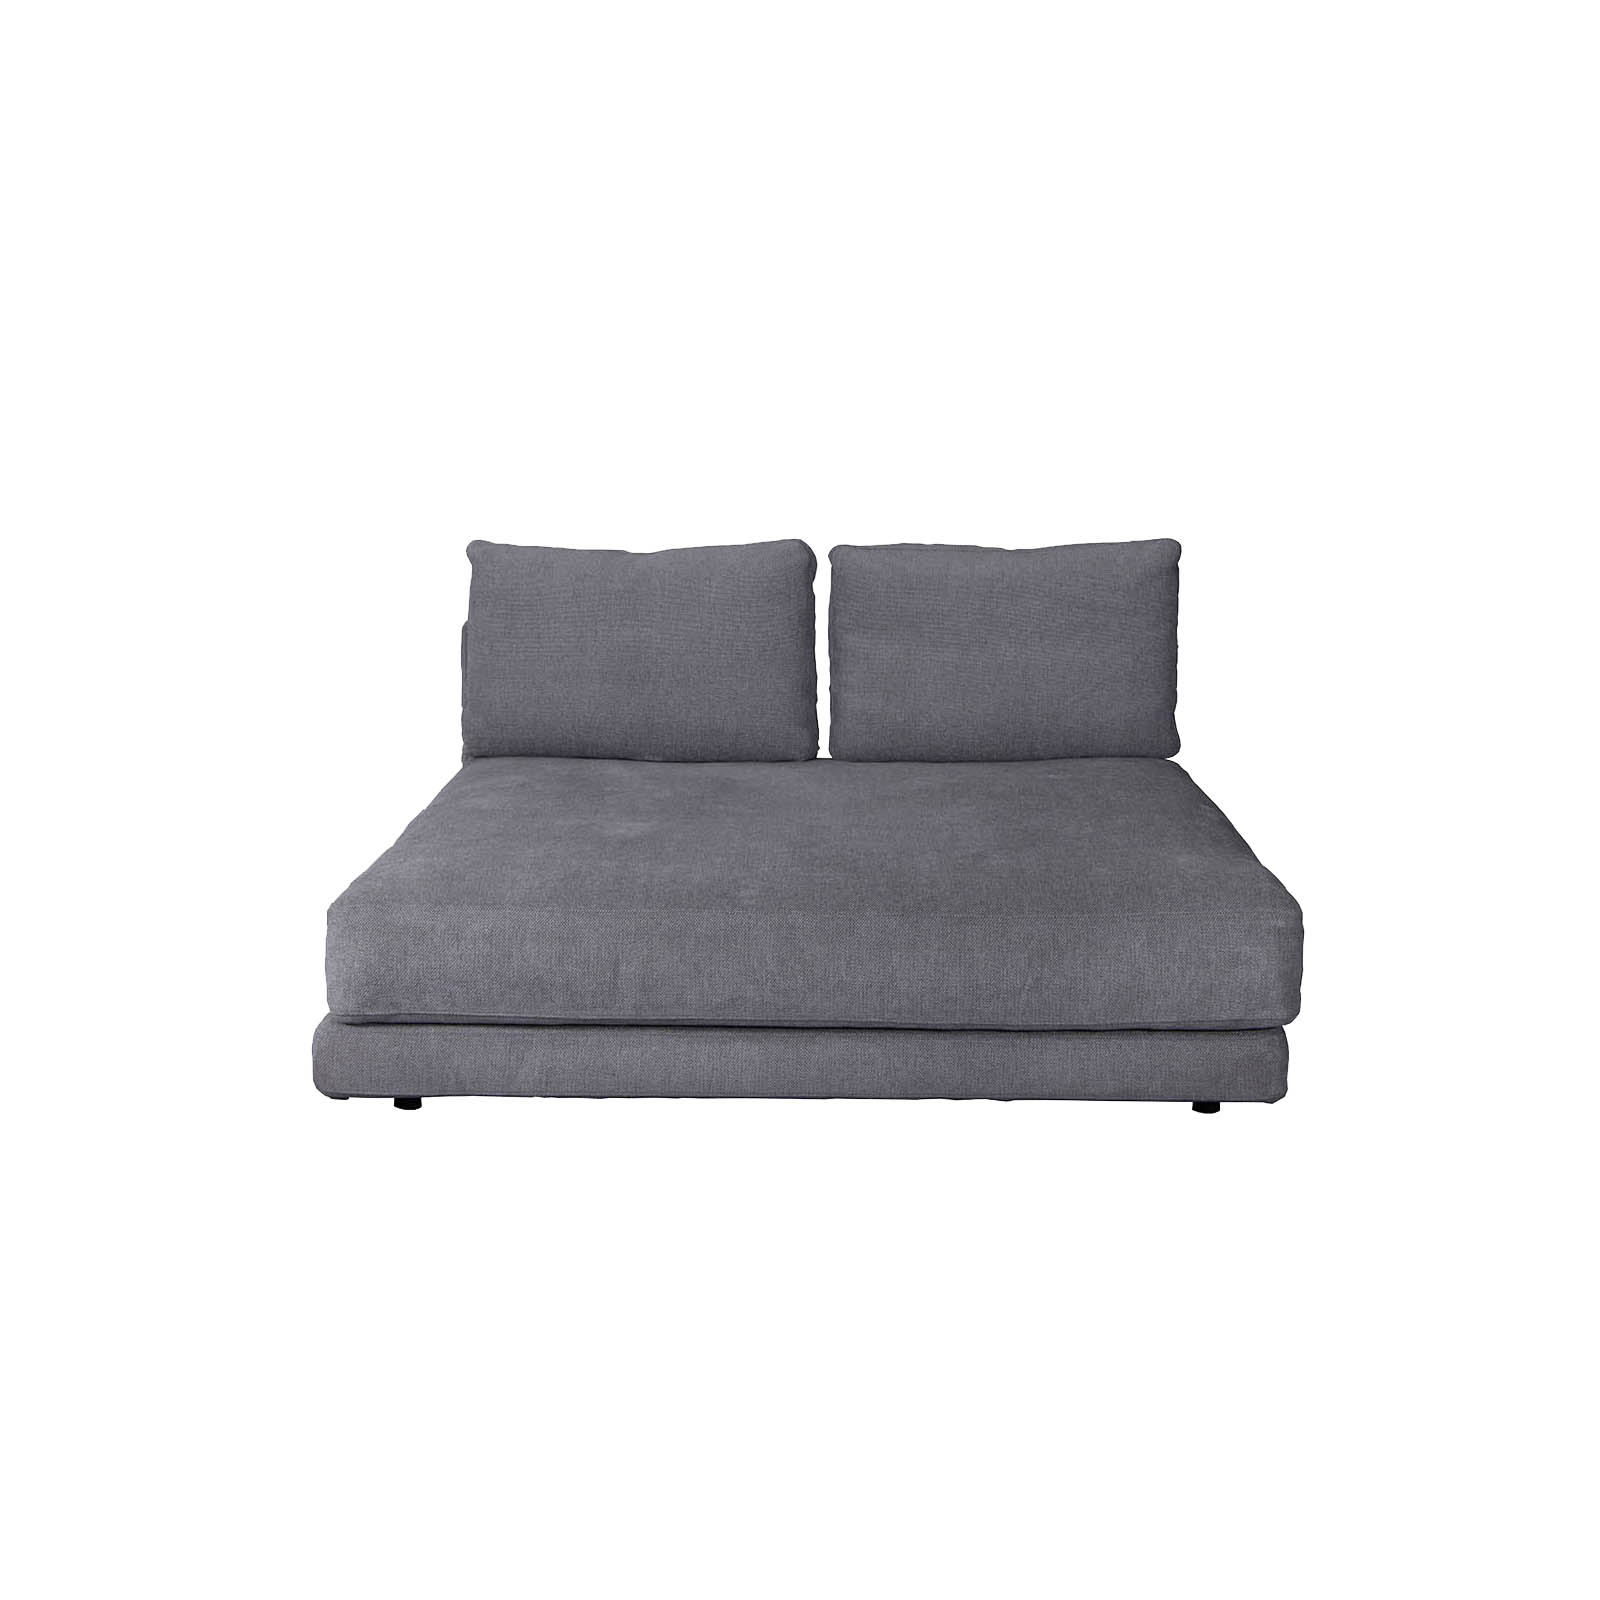 Scale doppel Daybed Modul aus Cane-line Ambience in Dark Grey